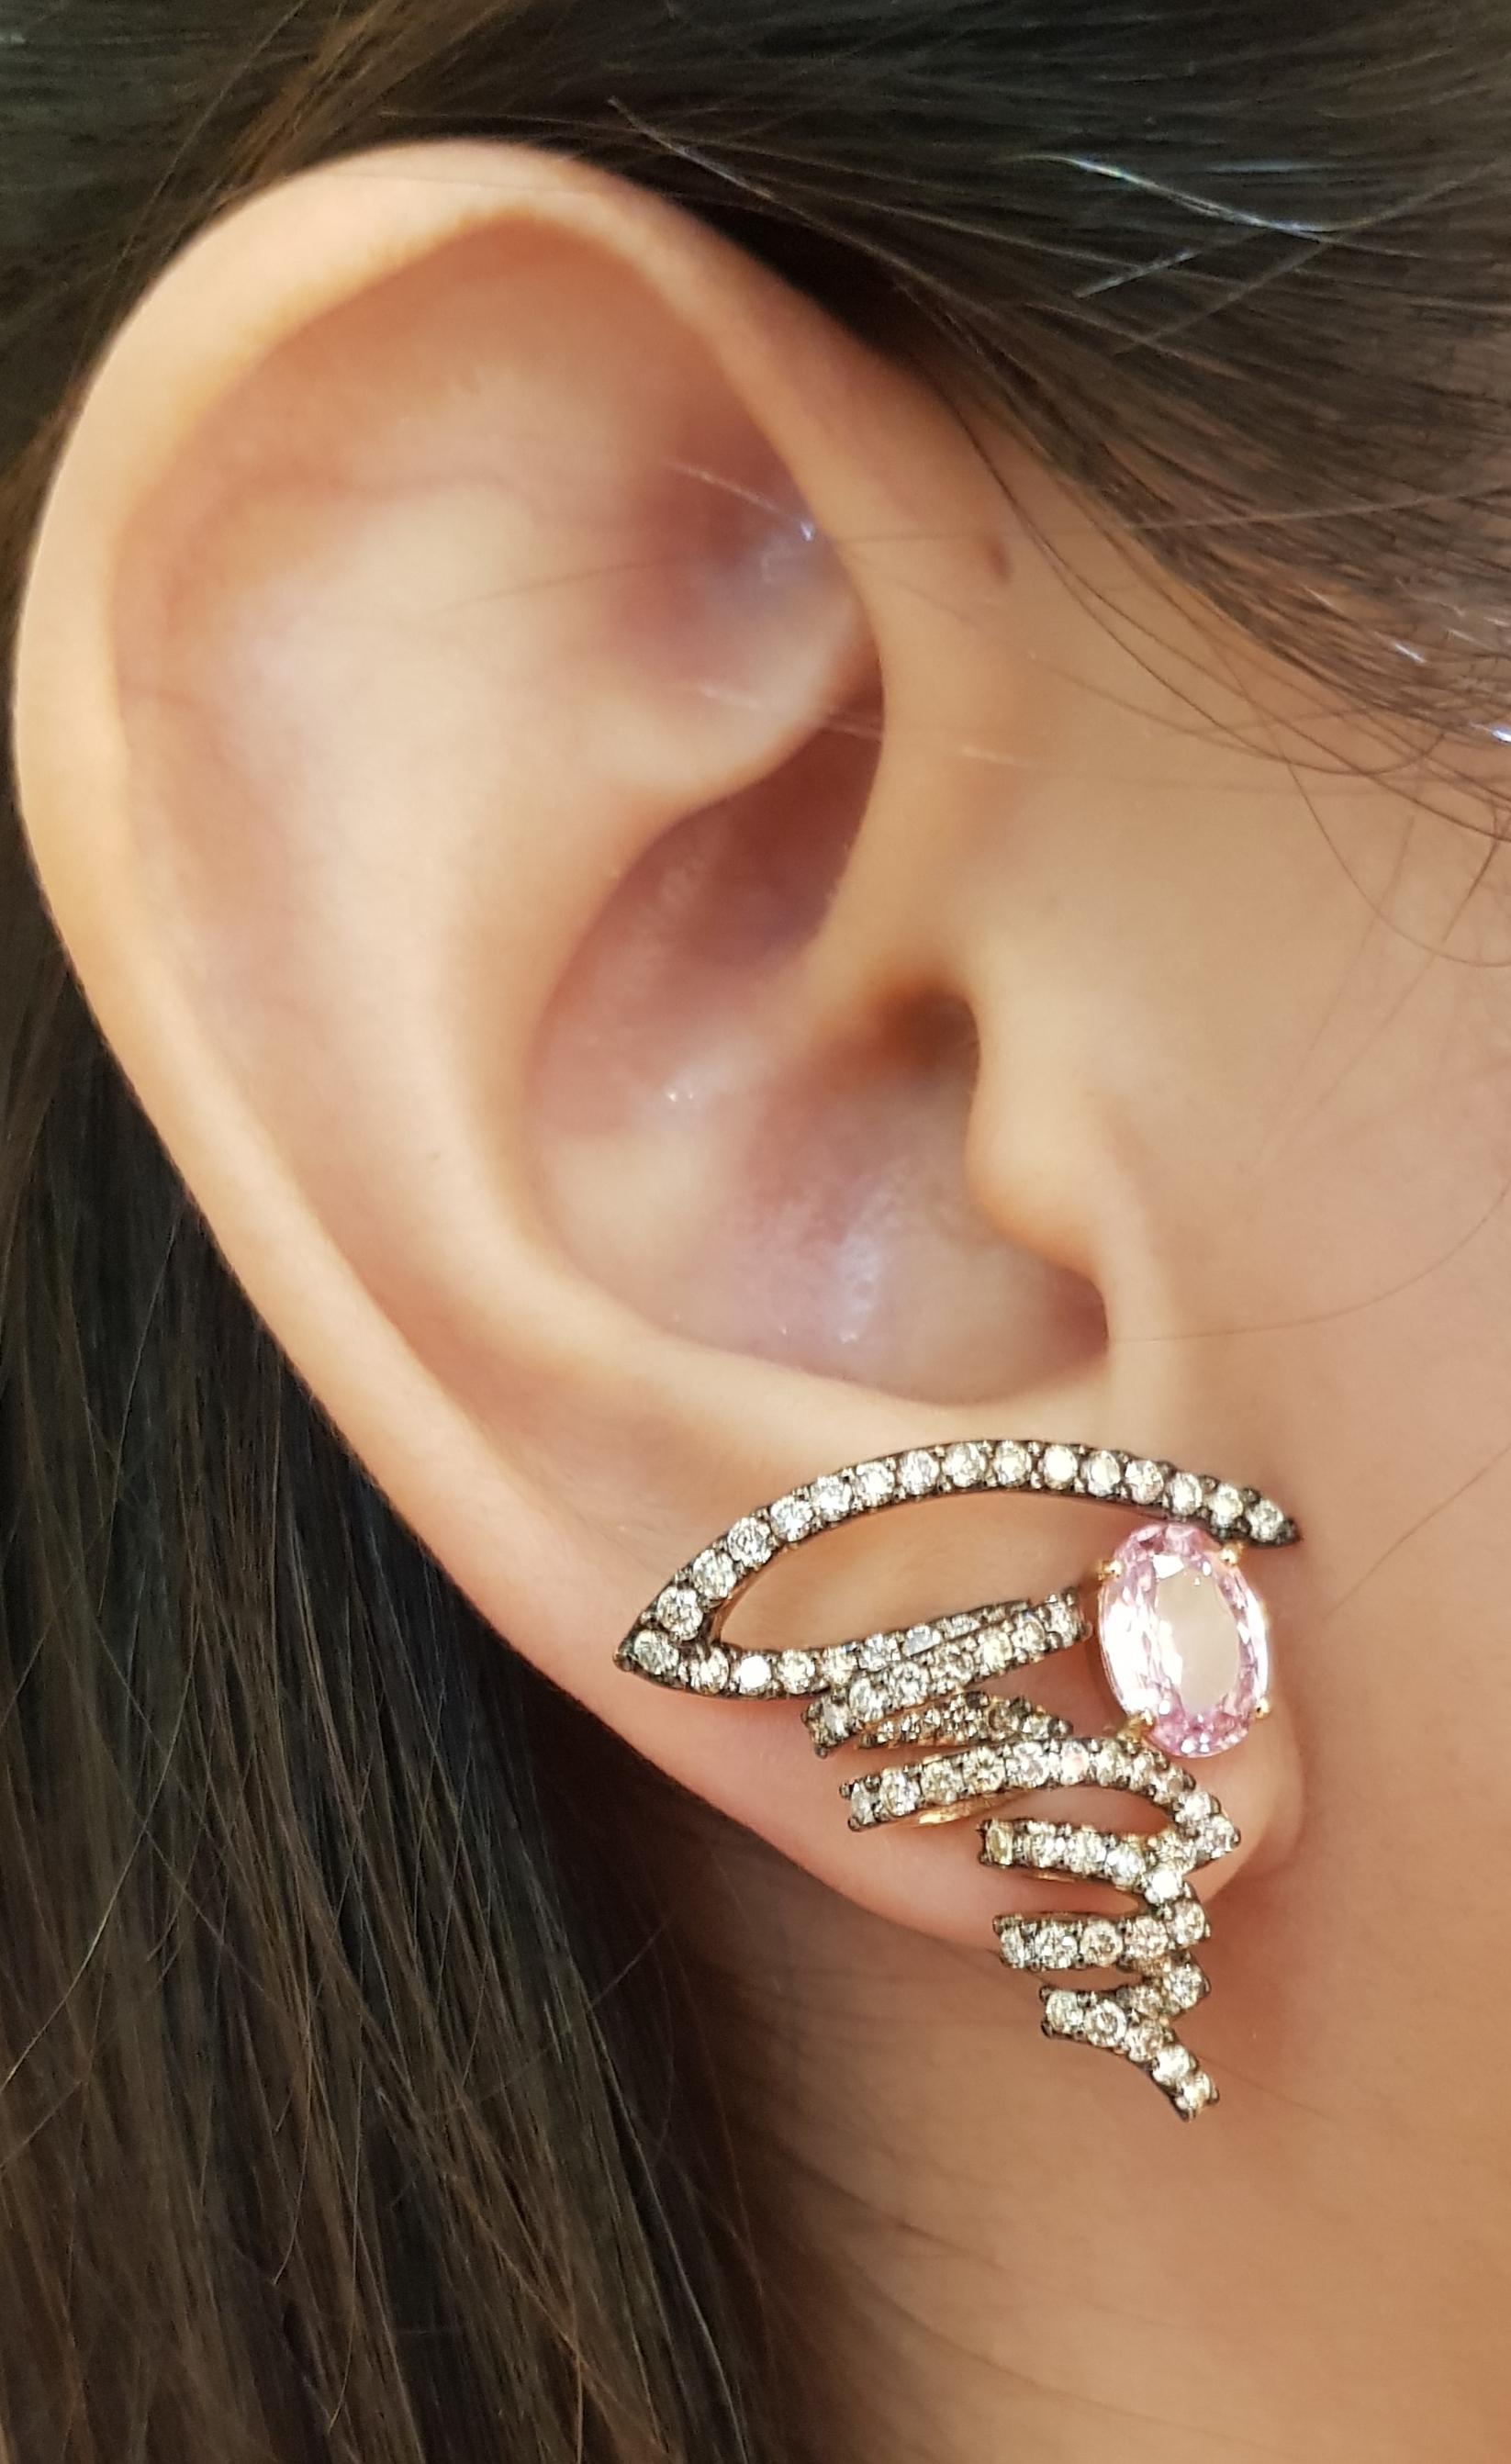 Pink Sapphire 2.90 carats with Brown Diamond 1.79 carats Earrings set in 18 Karat Rose Gold Settings

Width:  2.5 cm 
Length:  2.5 cm
Total Weight: 10.63 grams

